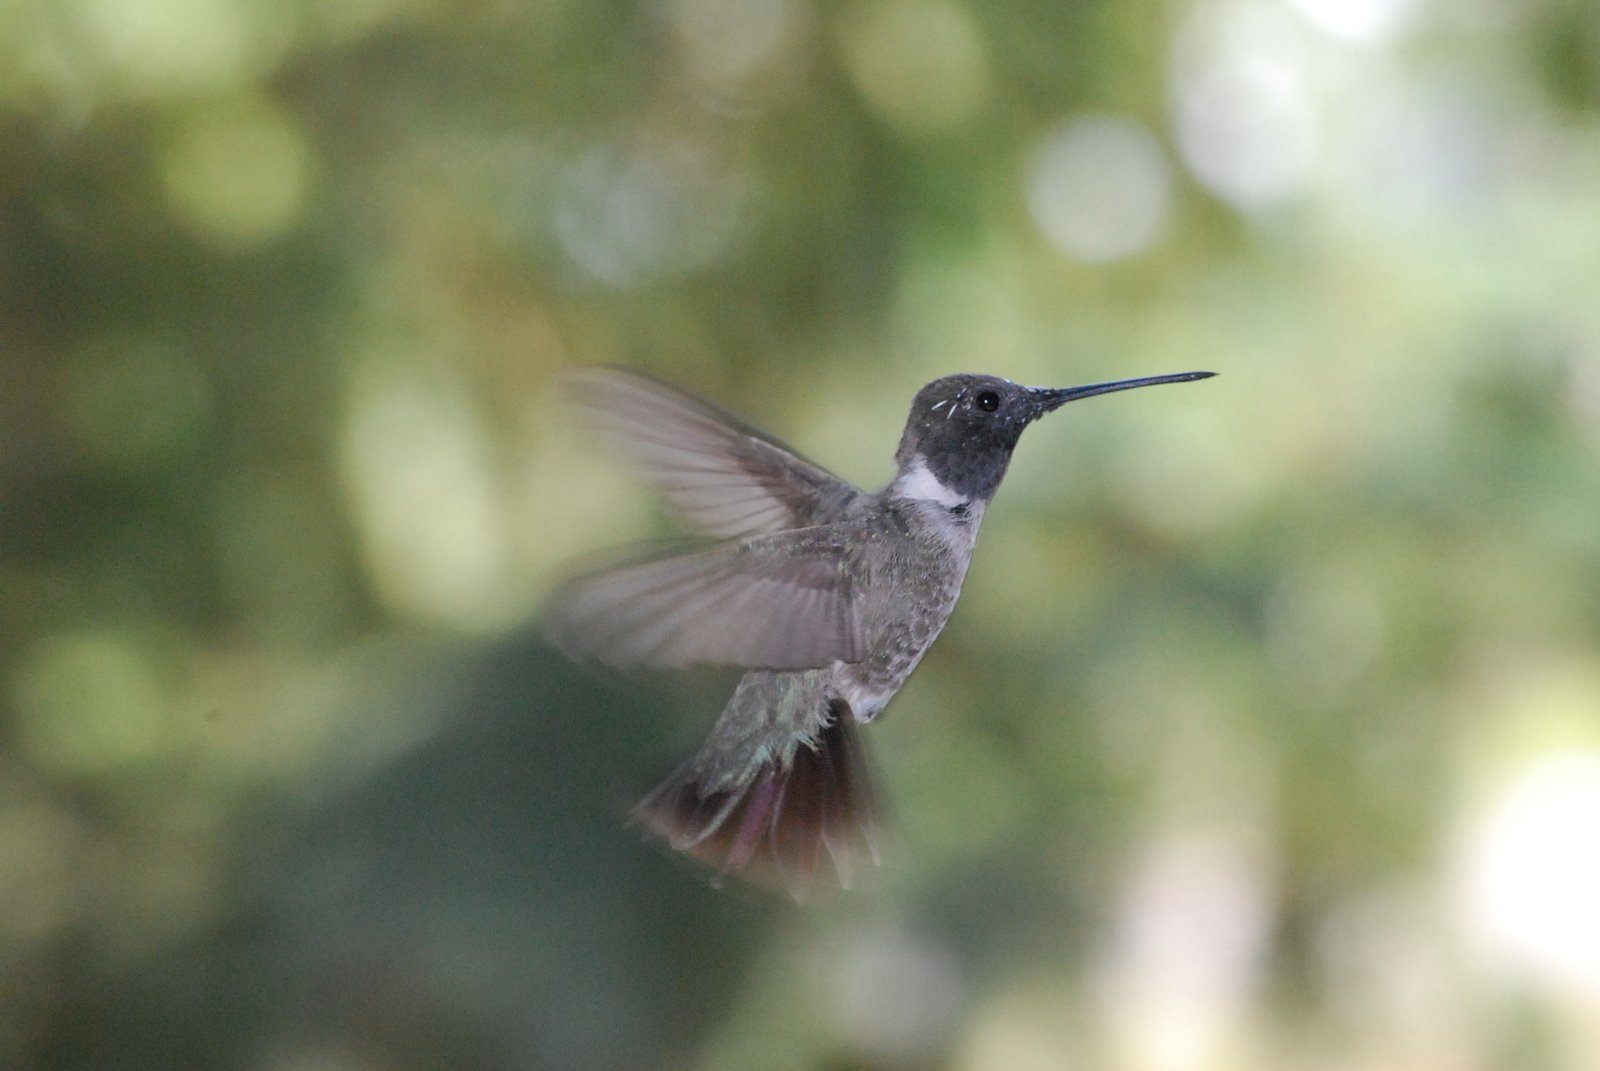 the small bird flies through the air with a blurry background